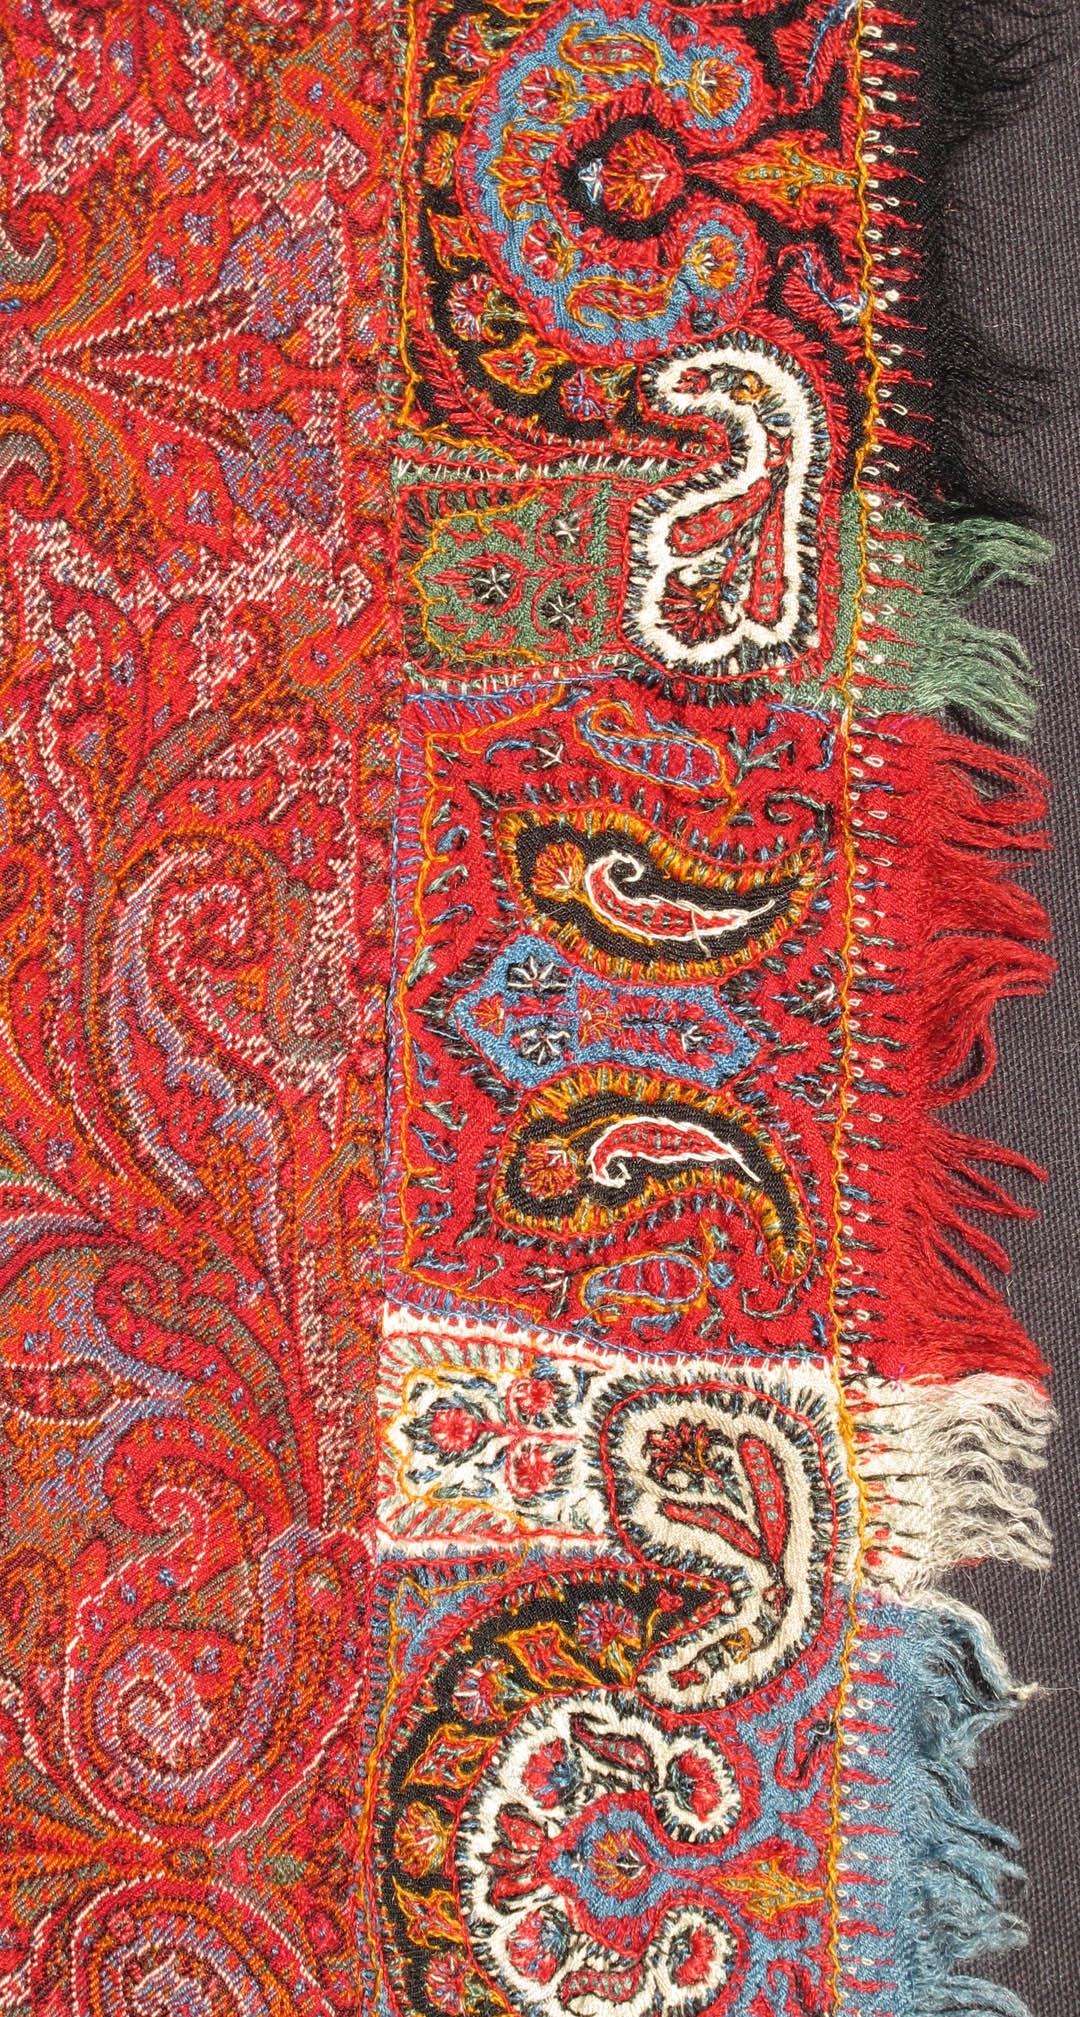 Antique Indian Handmade Paisley Textile Shawl in Red and Brilliant Border.
 
19th Century Antique Indian Hand made Paisley Textile Shawl with Brilliant Colors  L11-0907, Size/ , Country of Origin Indian Hand made Paisley.   
Measure: 5'11 x 6'2